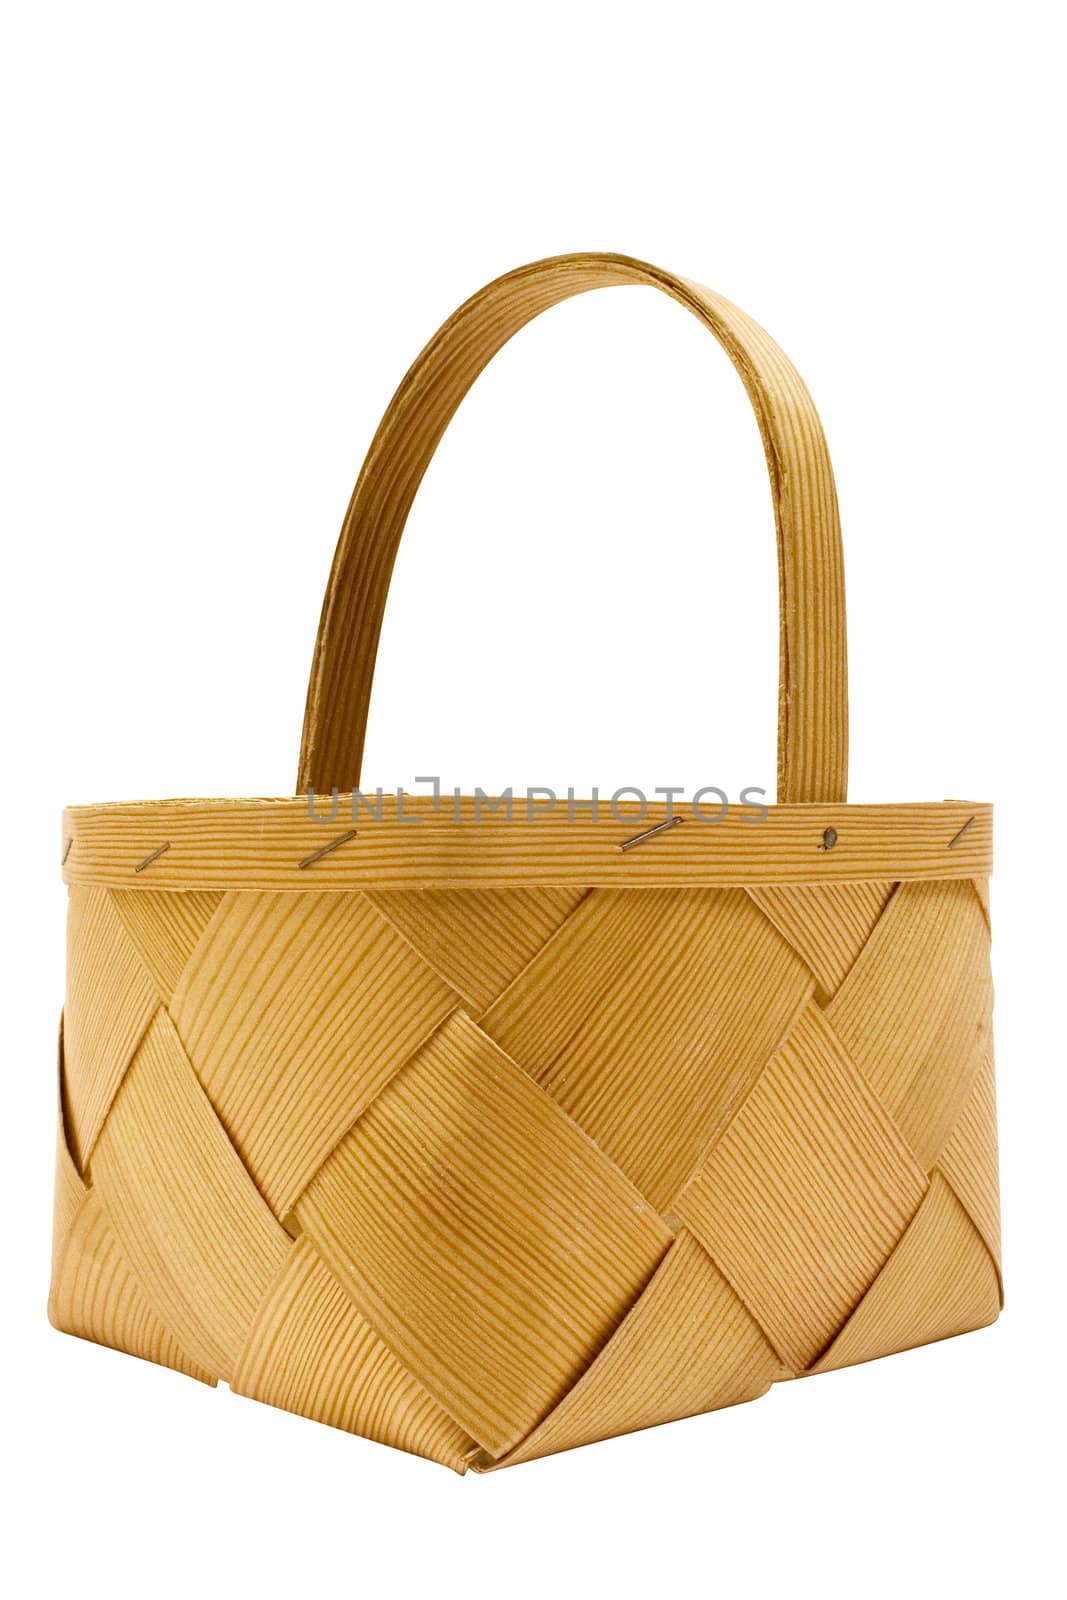 Wooden basket isolated on a white background. File contains clipping path.